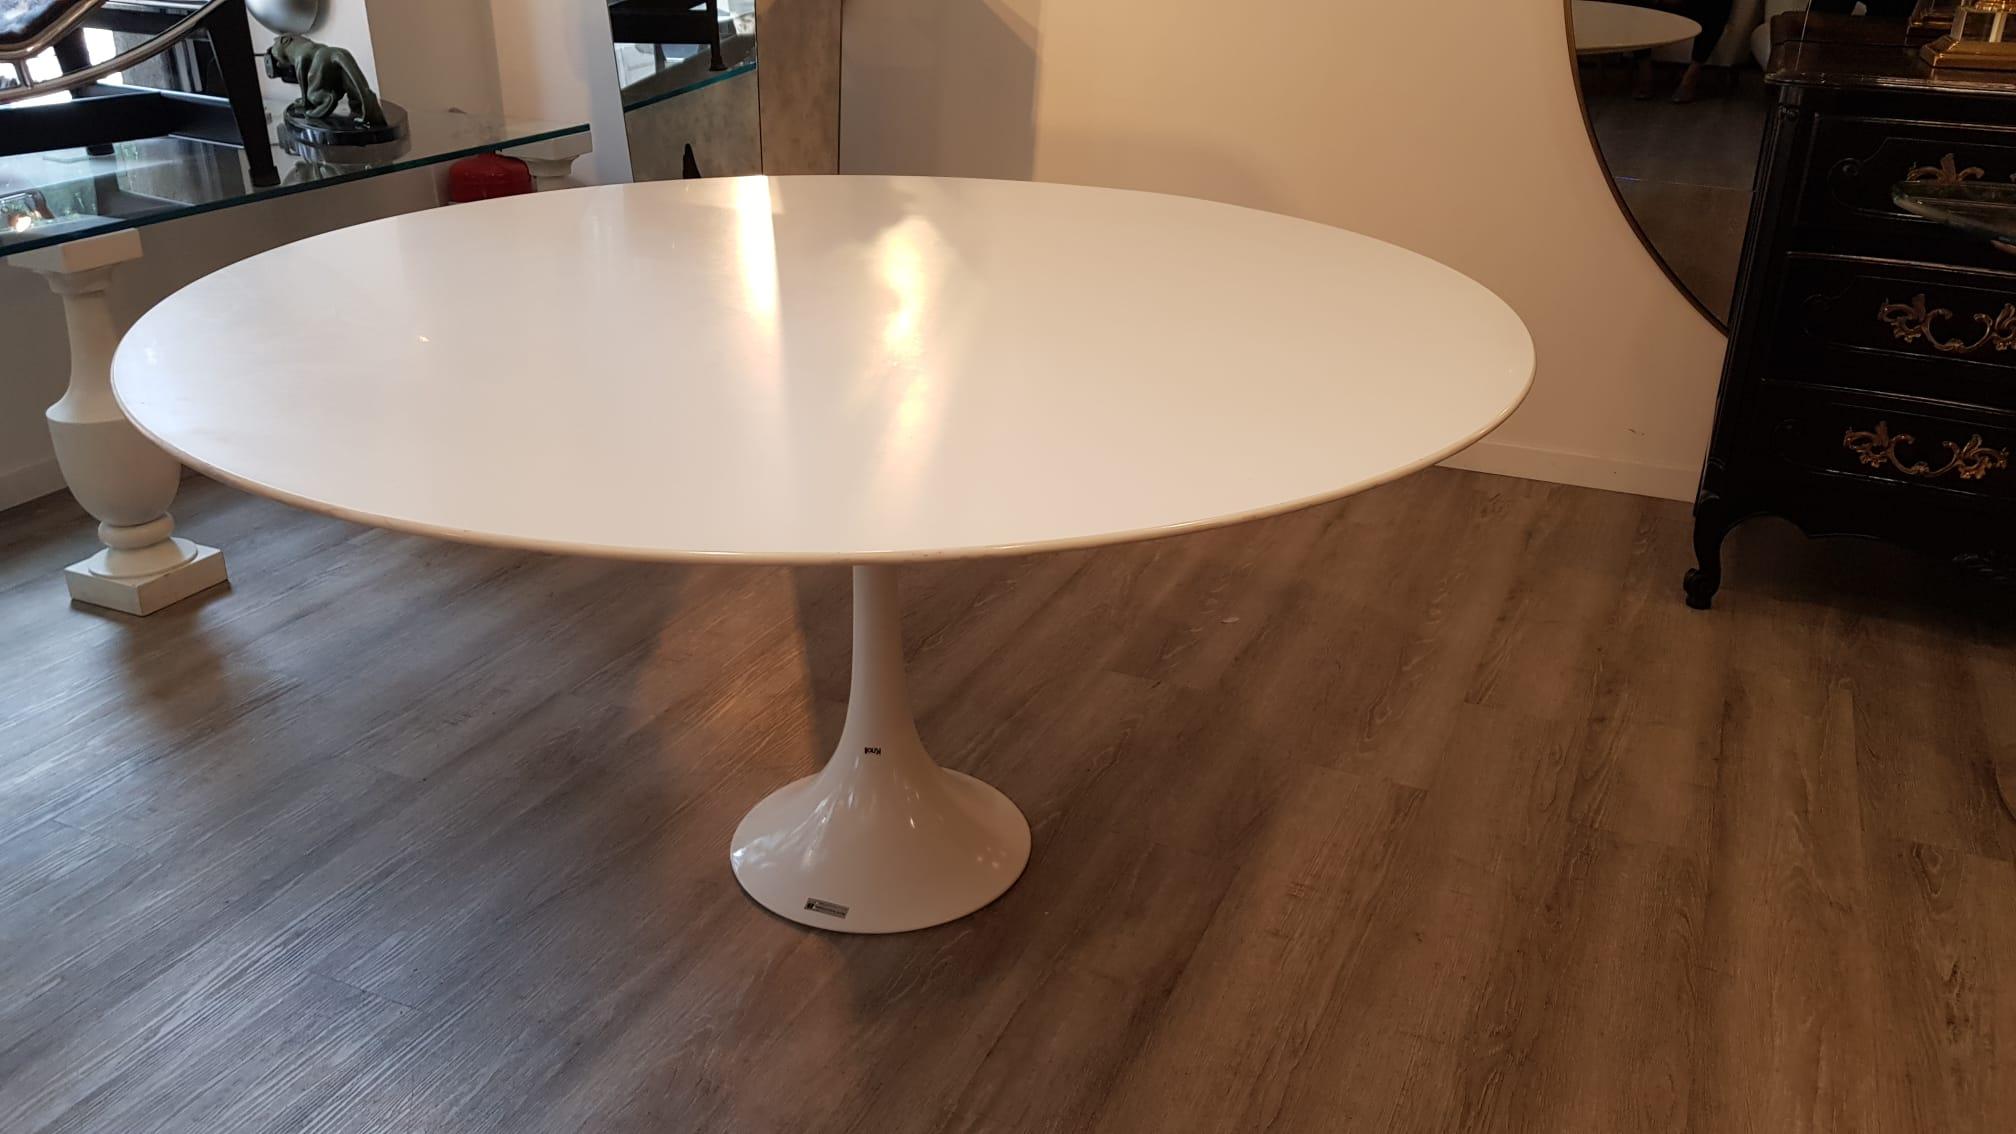 Tulip laminated white table from Pedestal collection designed by Eero Saarinen for Knoll in 1961 and since then produced by Knoll International. 
Knoll International started in 1951 when Knoll established subsidiaries in France and Germany. The aim